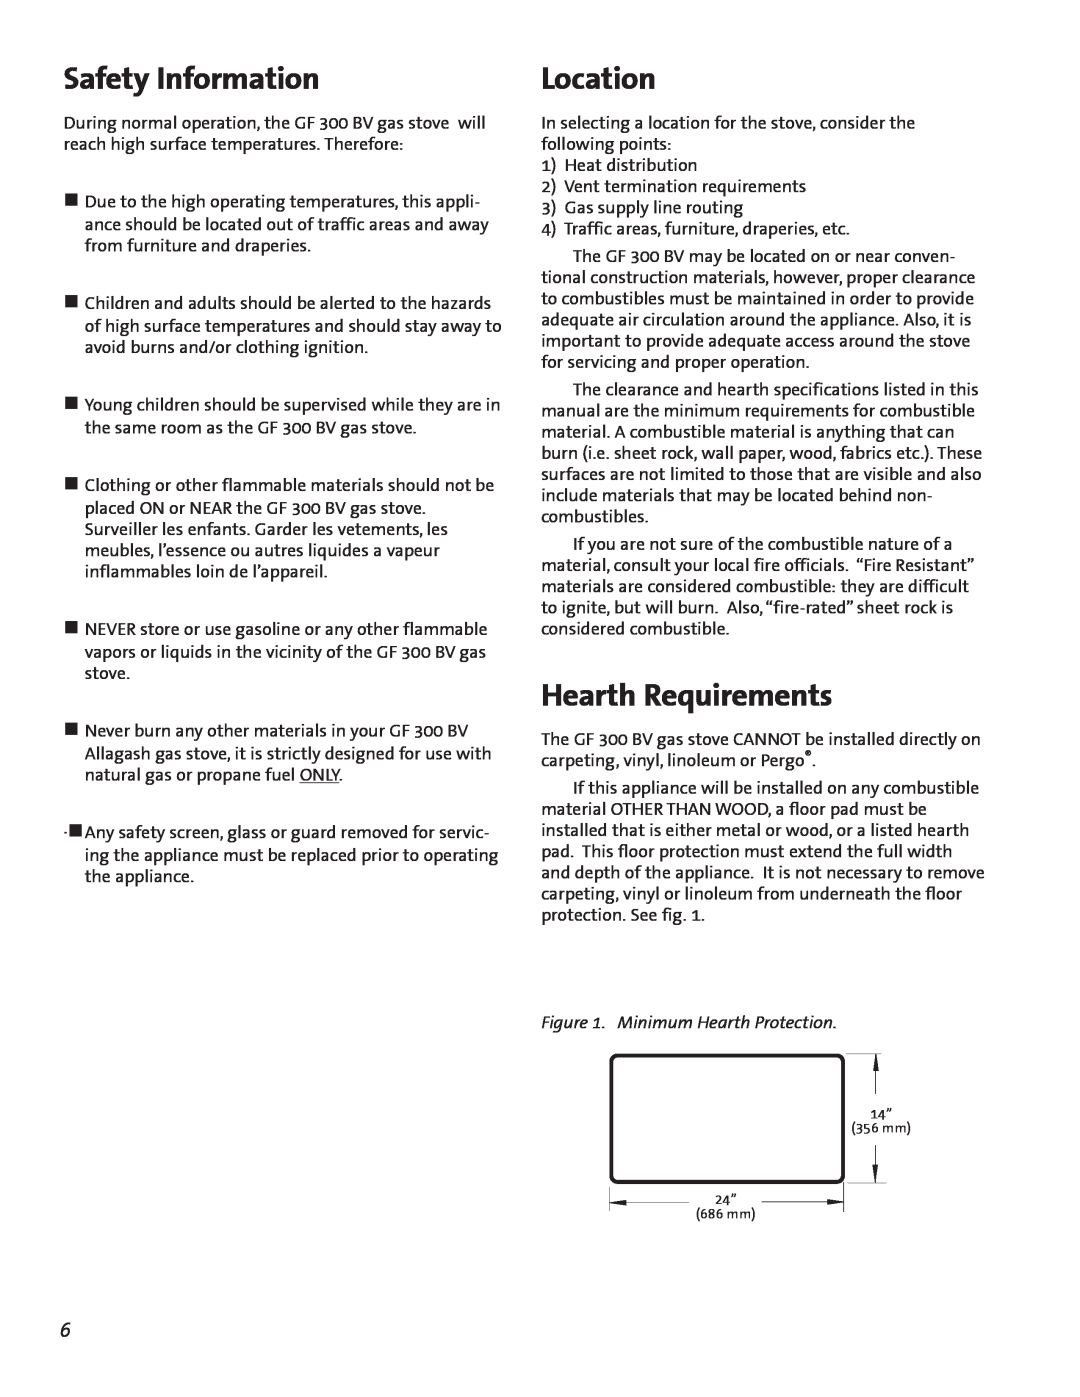 Jotul GF300 BV manual Safety Information, Location, Hearth Requirements, Minimum Hearth Protection 